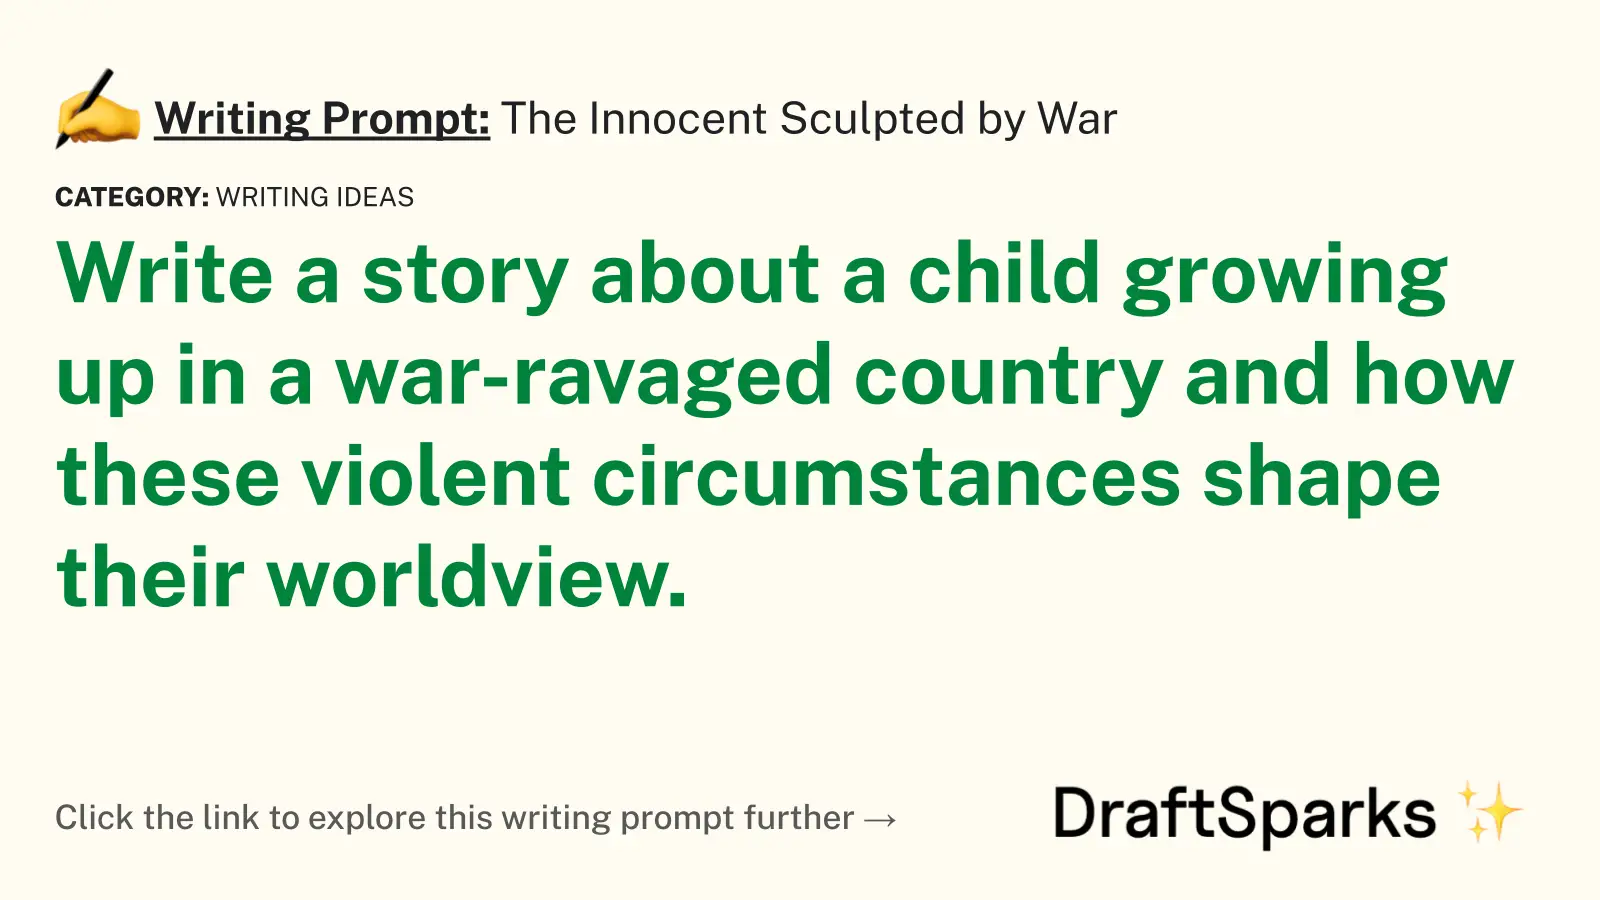 The Innocent Sculpted by War